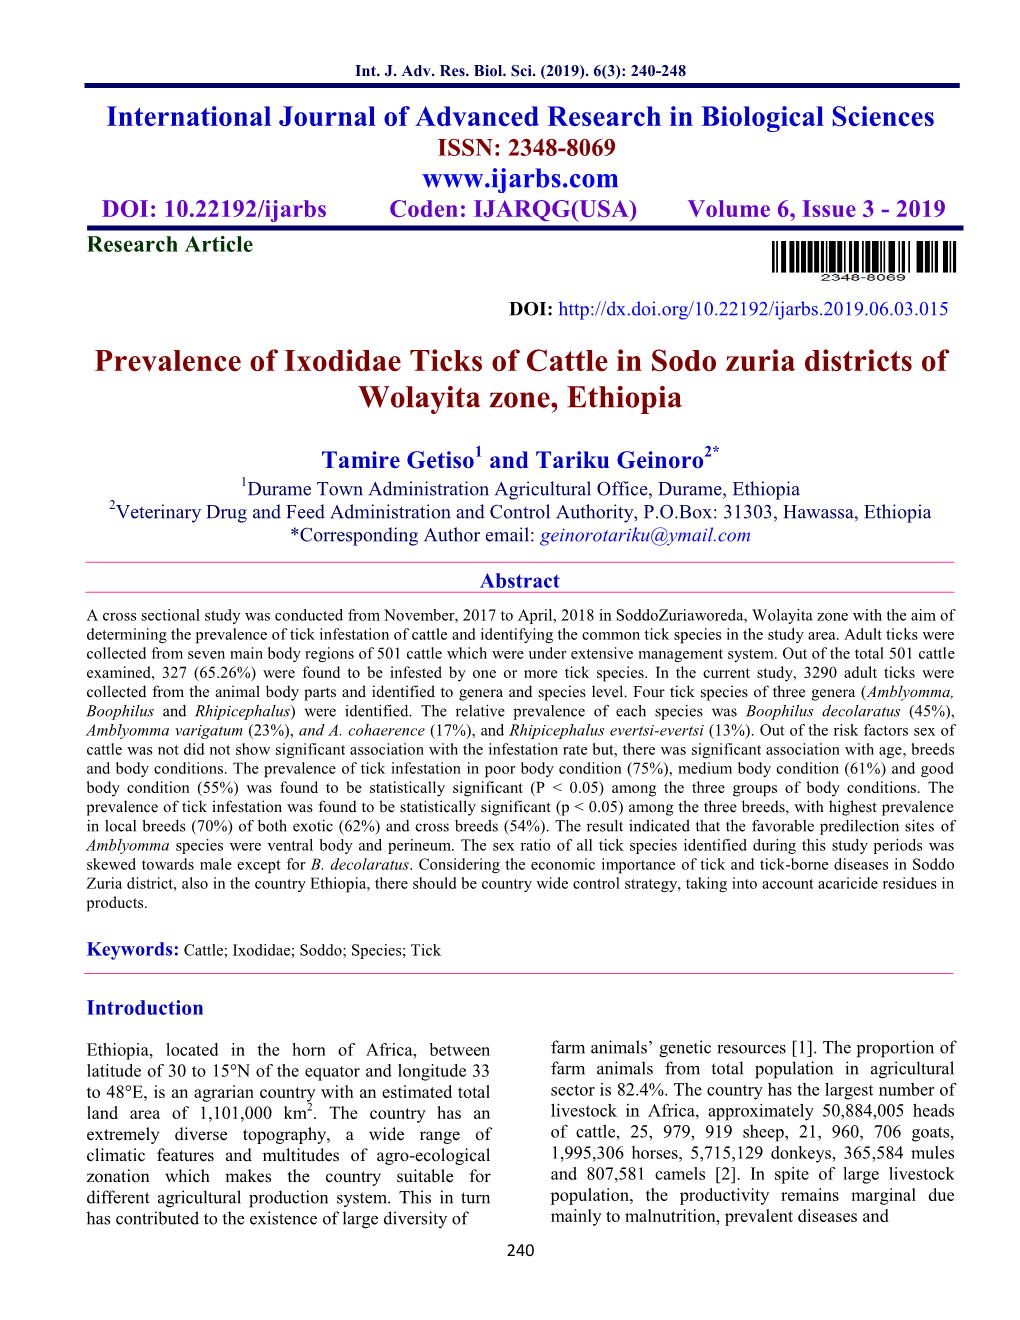 Prevalence of Ixodidae Ticks of Cattle in Sodo Zuria Districts of Wolayita Zone, Ethiopia